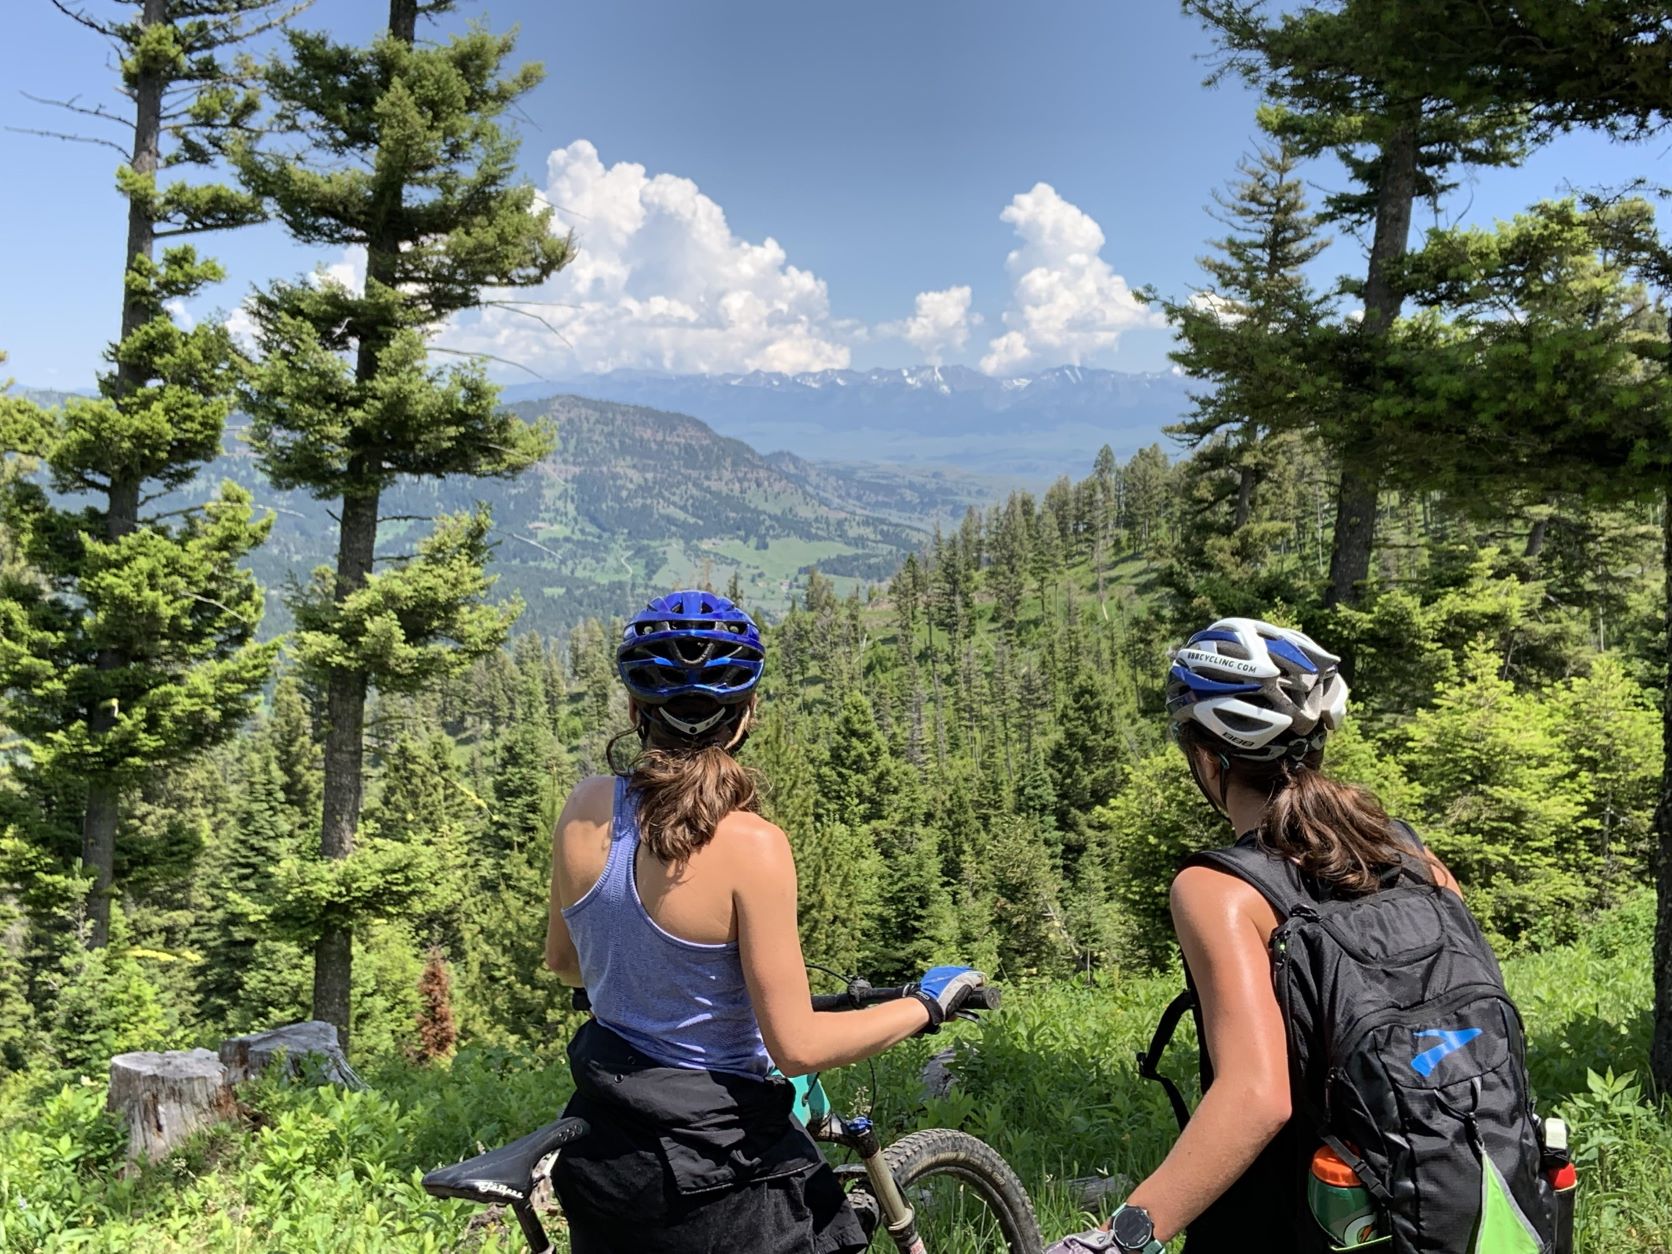 Two female mountain bike riders taking a break off their bikes to enjoy the distant view of mountains and forests across a valley near the Continental Divide Trail near Butte, Montana.